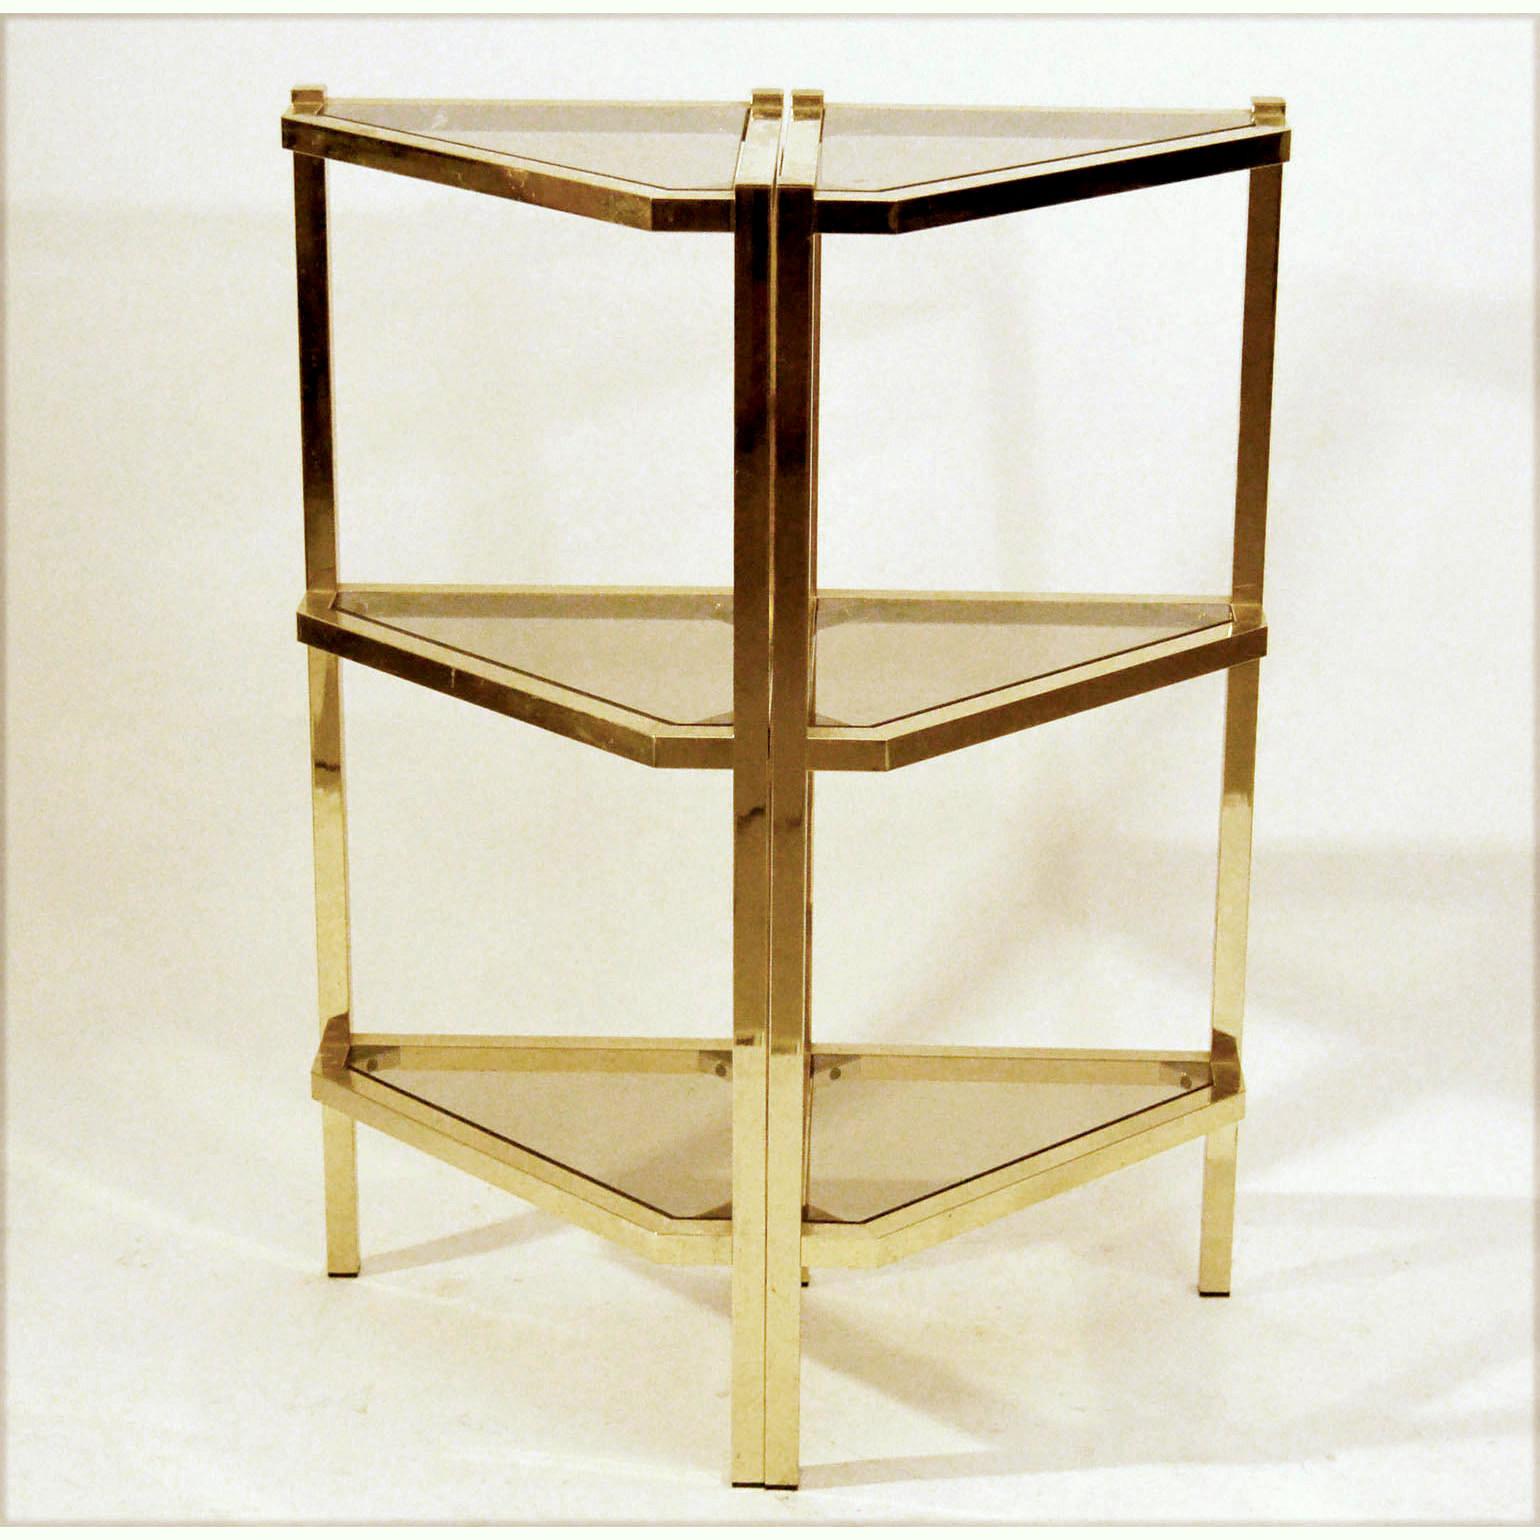 Hollywood Regency Pair of Triangular Brass and Glass 1970s Shelving Units